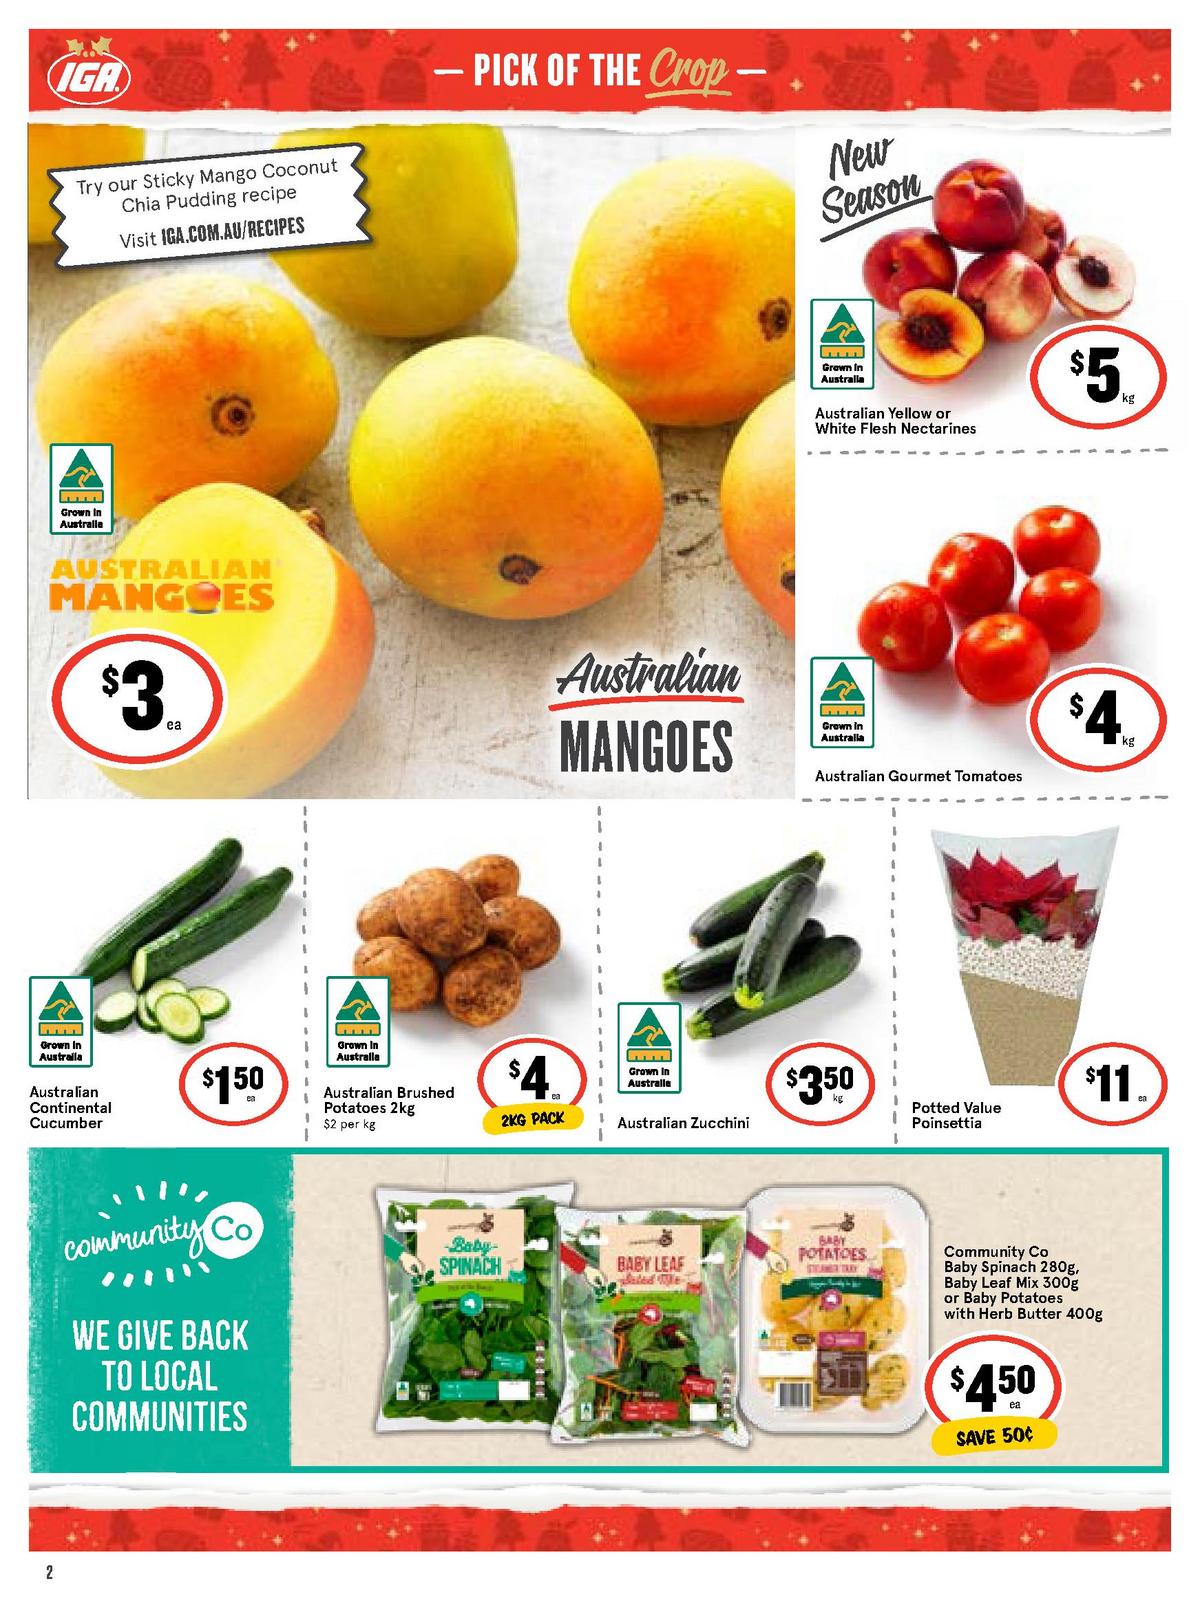 IGA Catalogues from 2 December